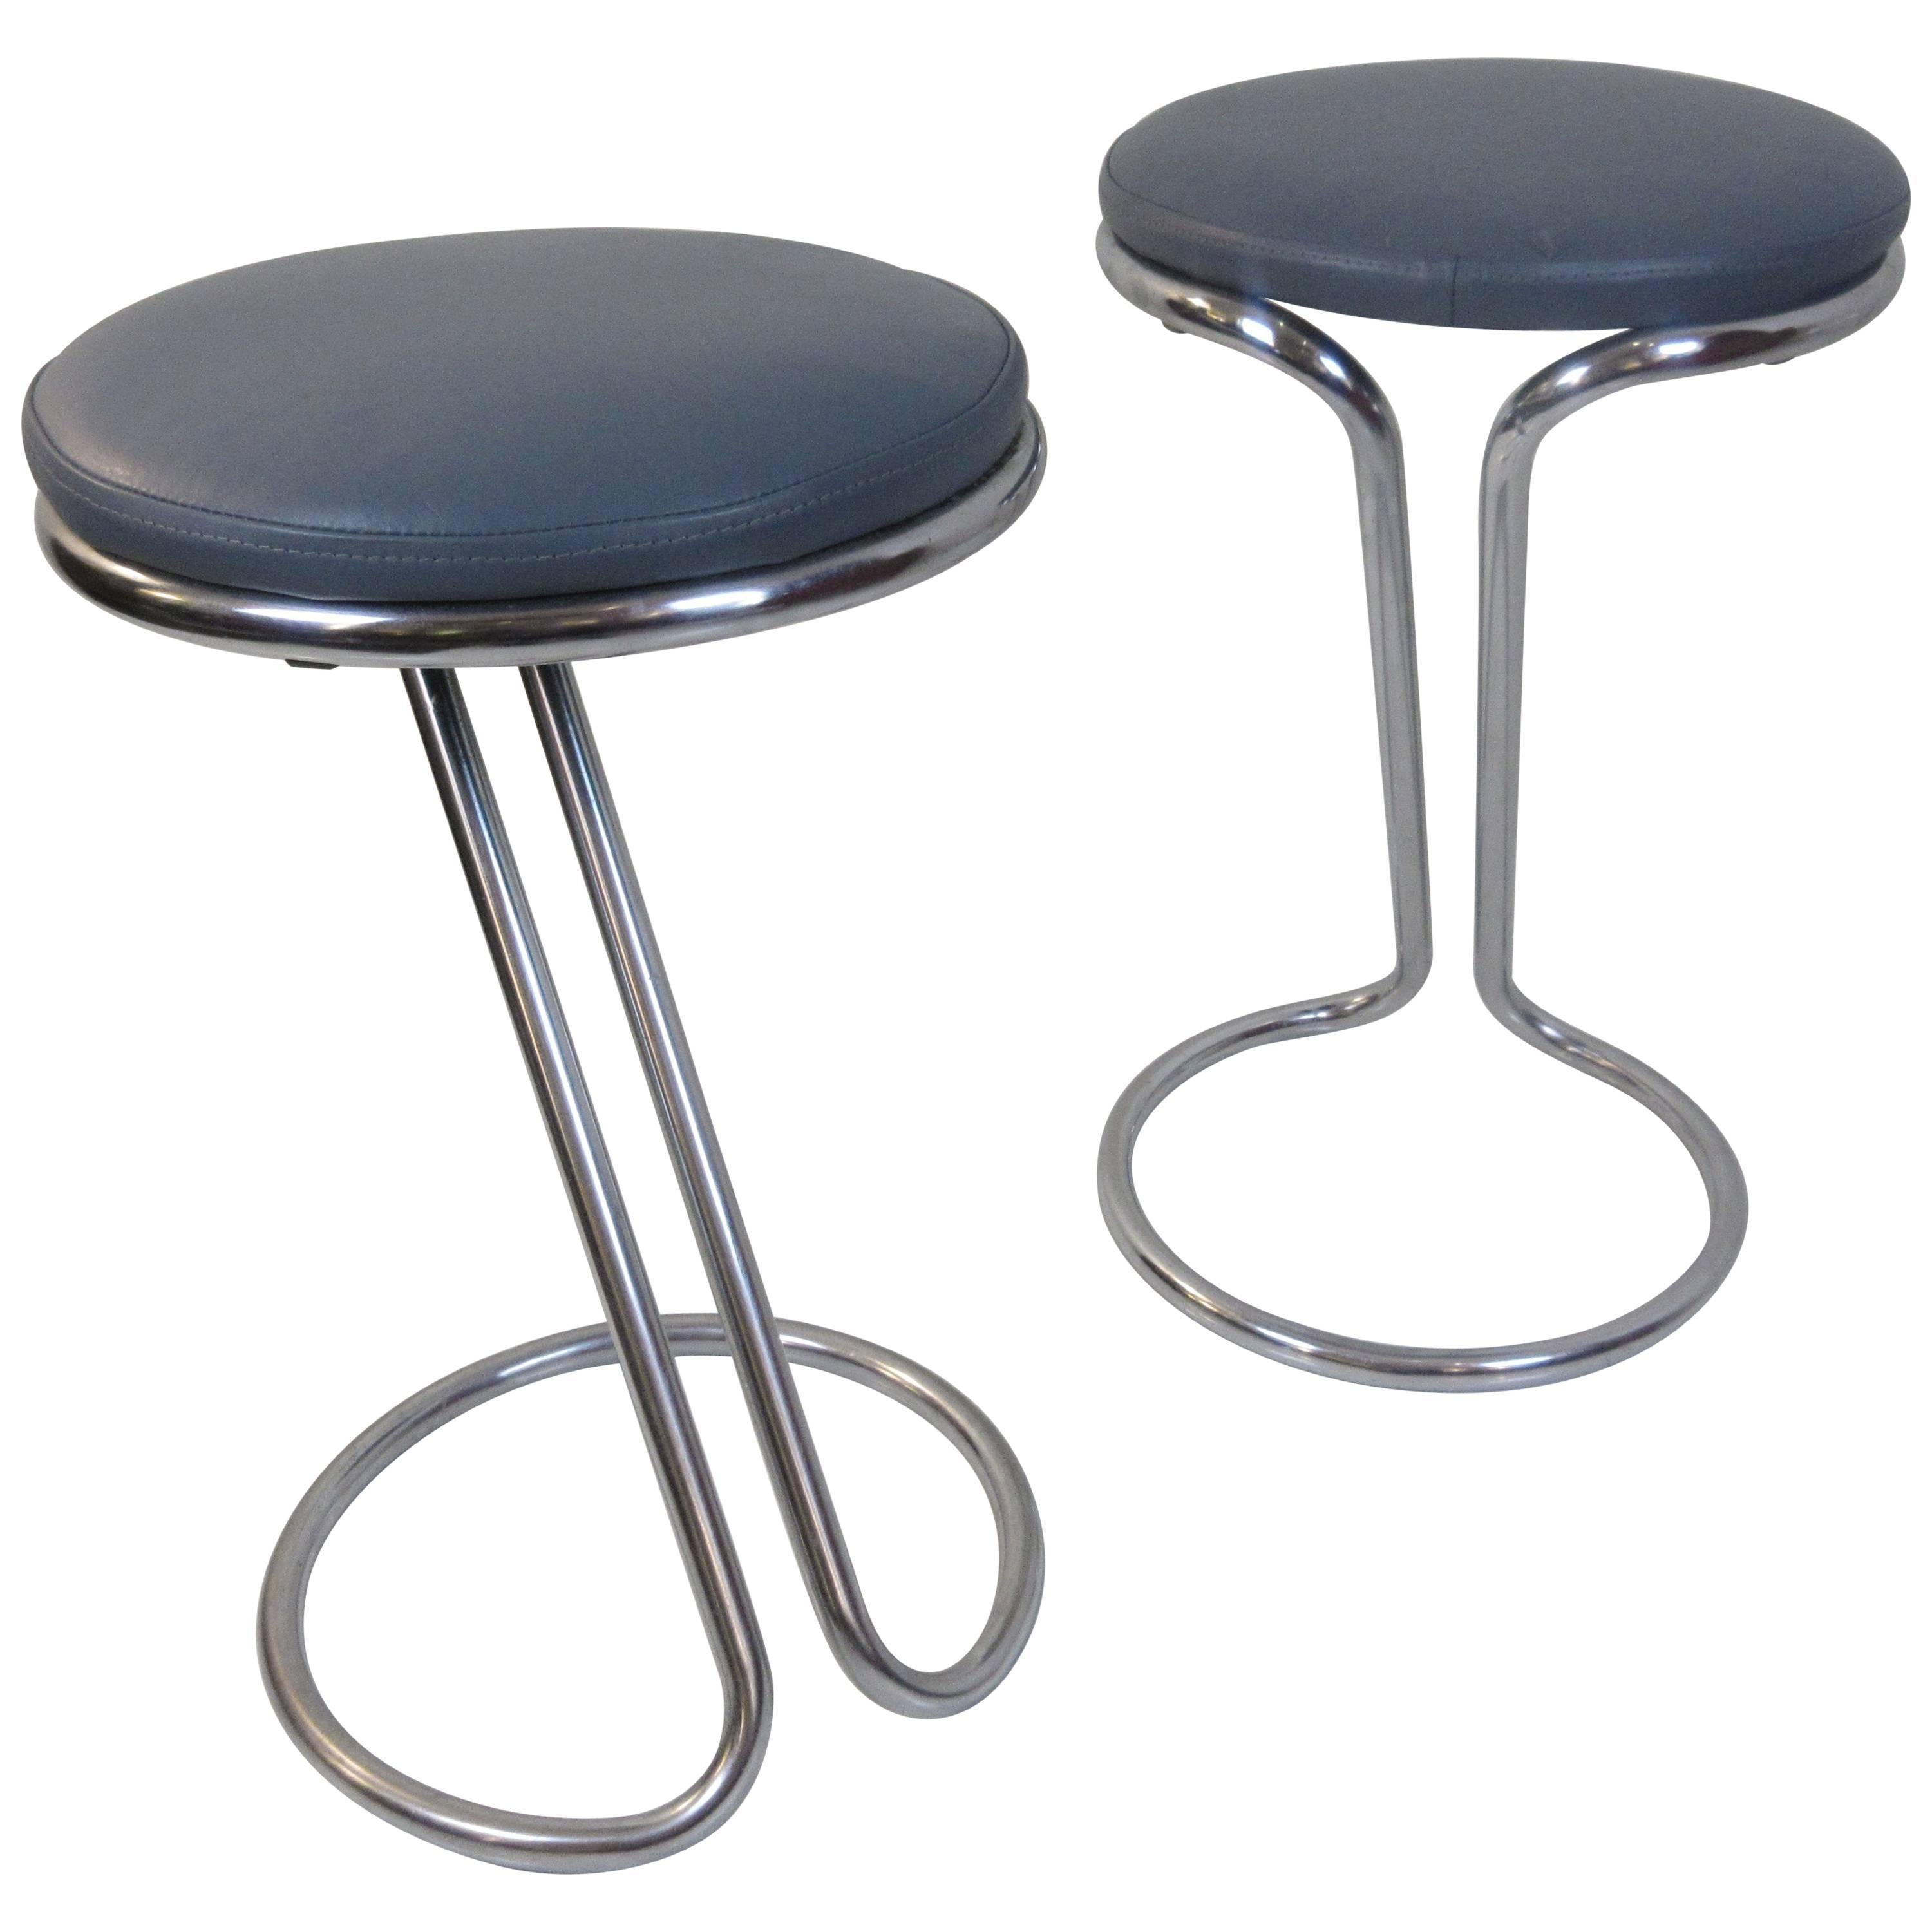 Gilbert Rohde for Troy Sunshade Company Z Stools in Leather